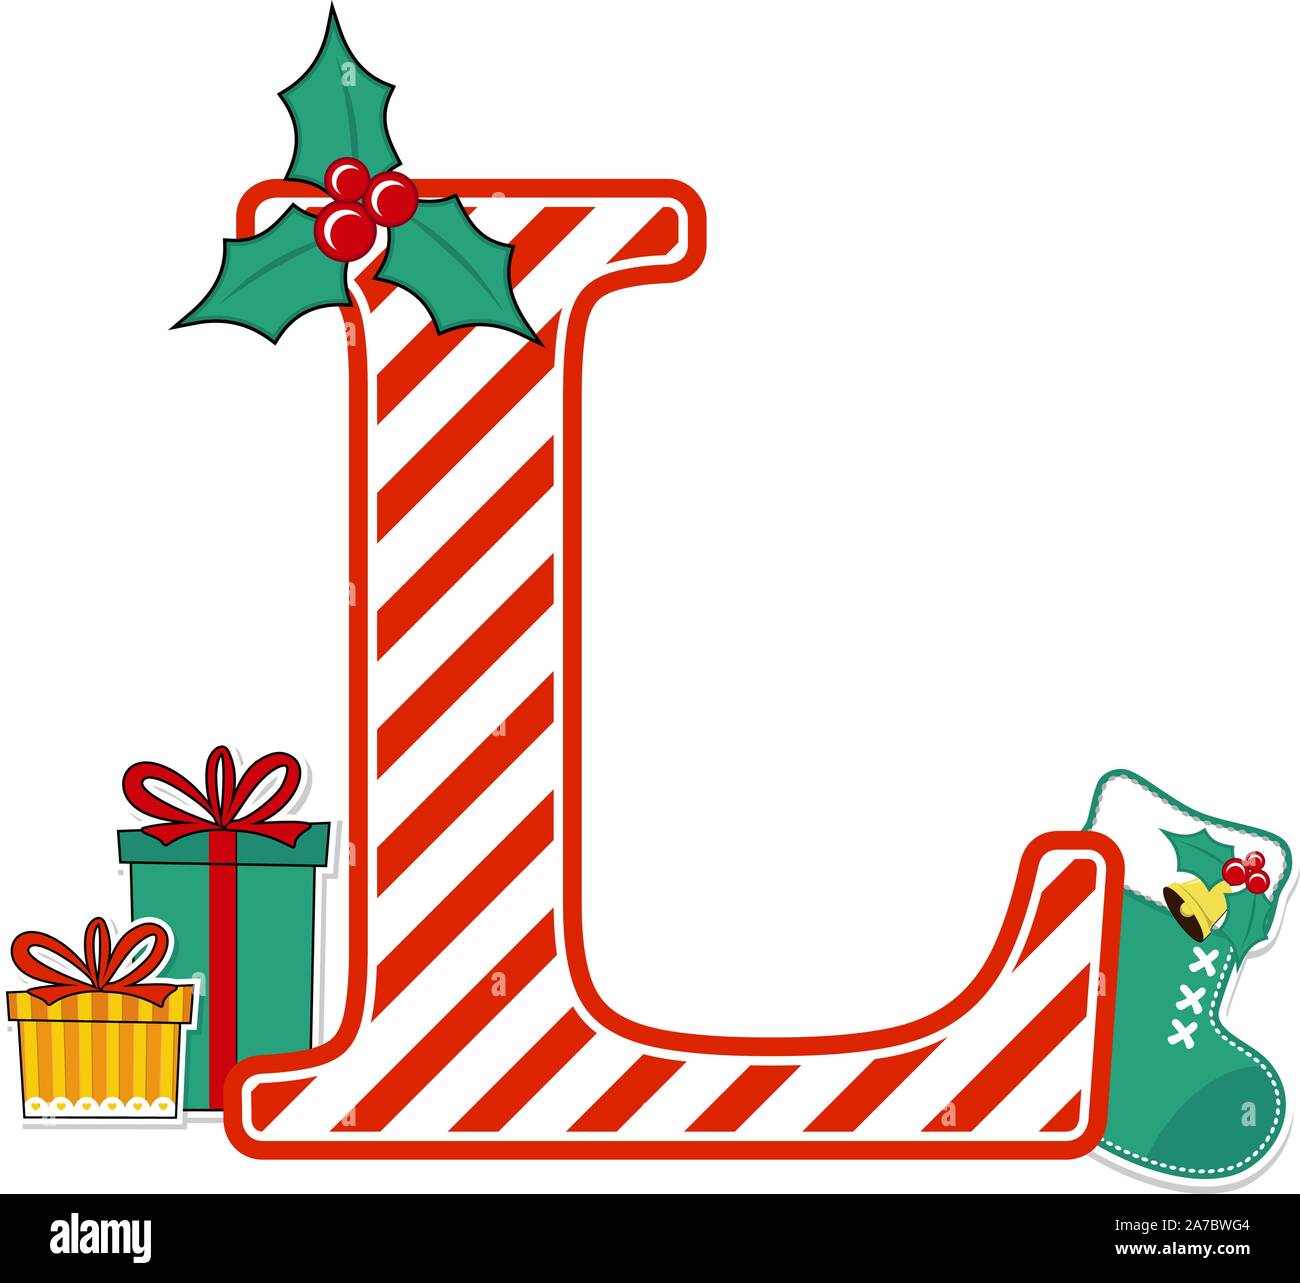 capital letter l with red and white candy cane pattern and christmas design elements isolated on white background. can be used for holiday season card Stock Vector